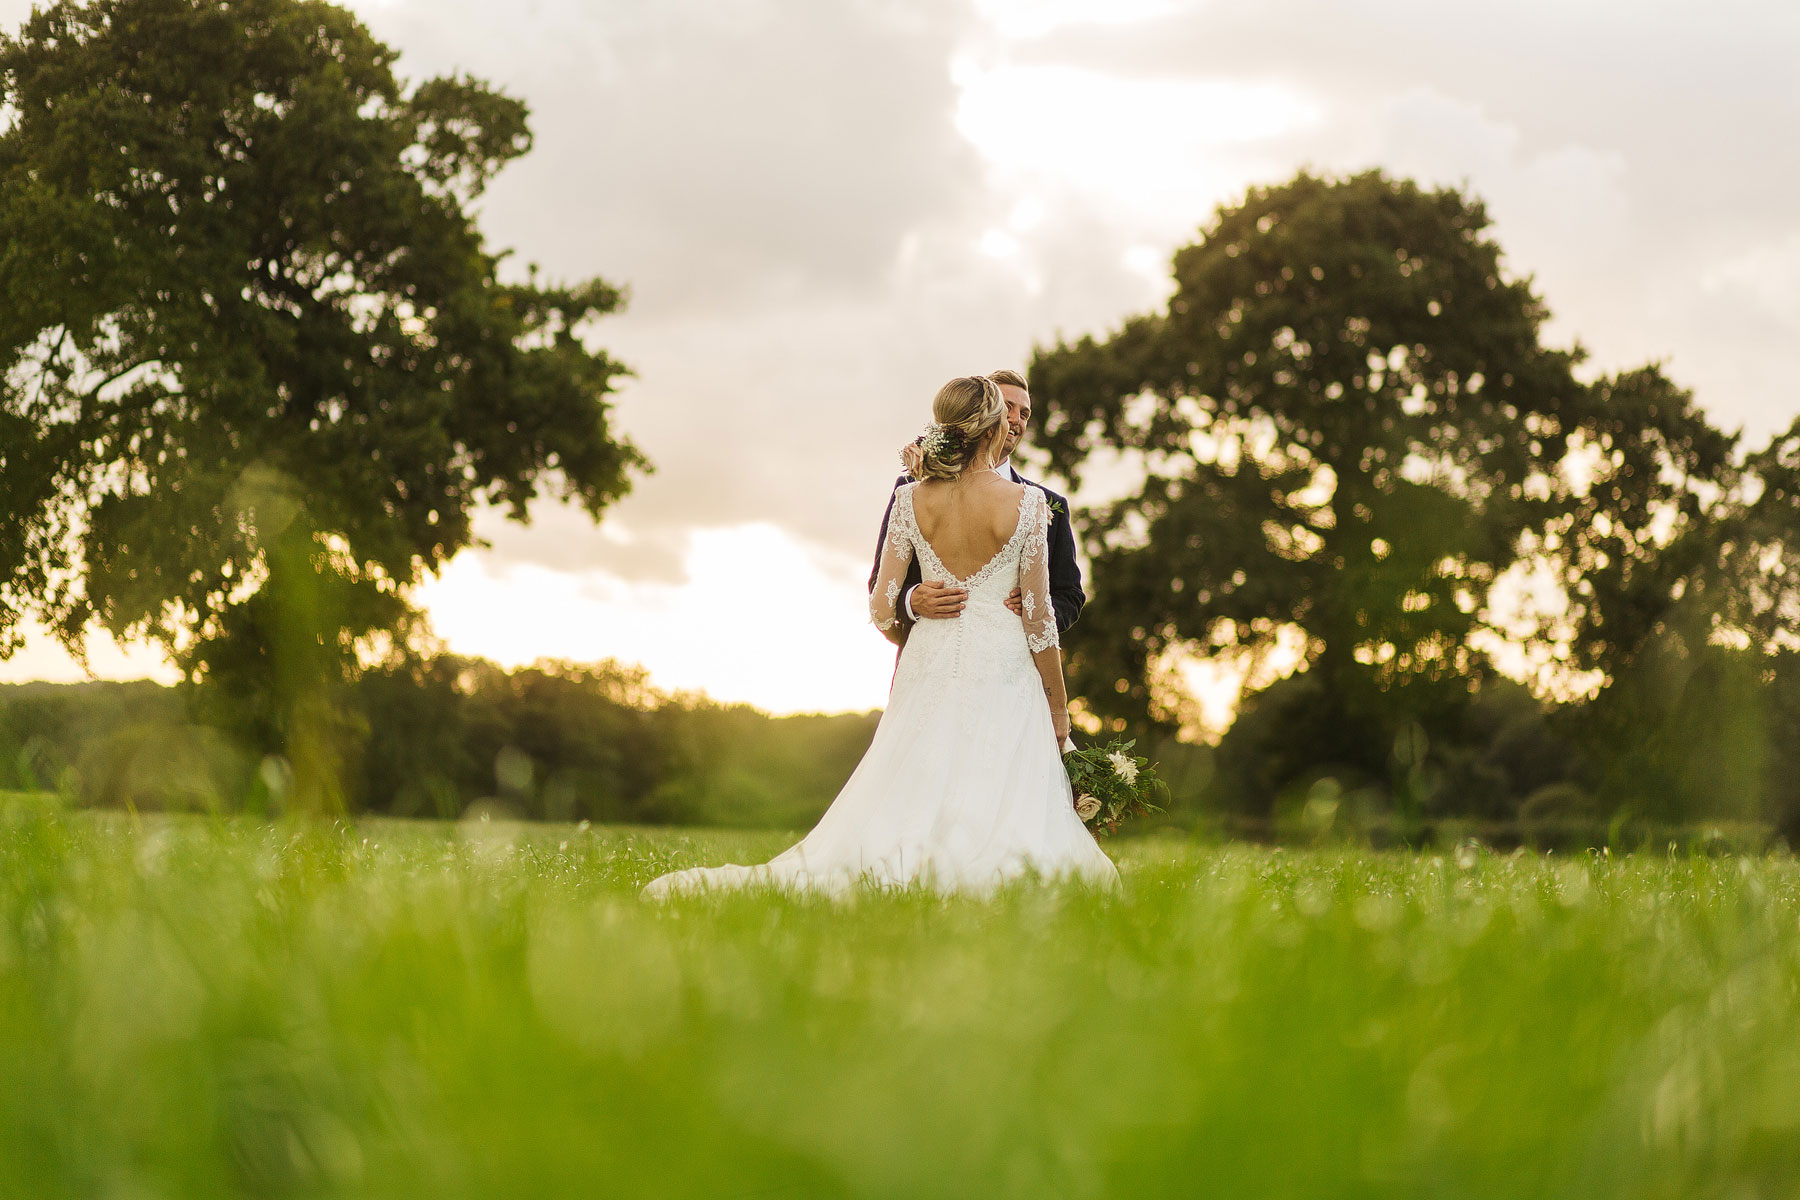 amazing pictures of a bride and groom in a field